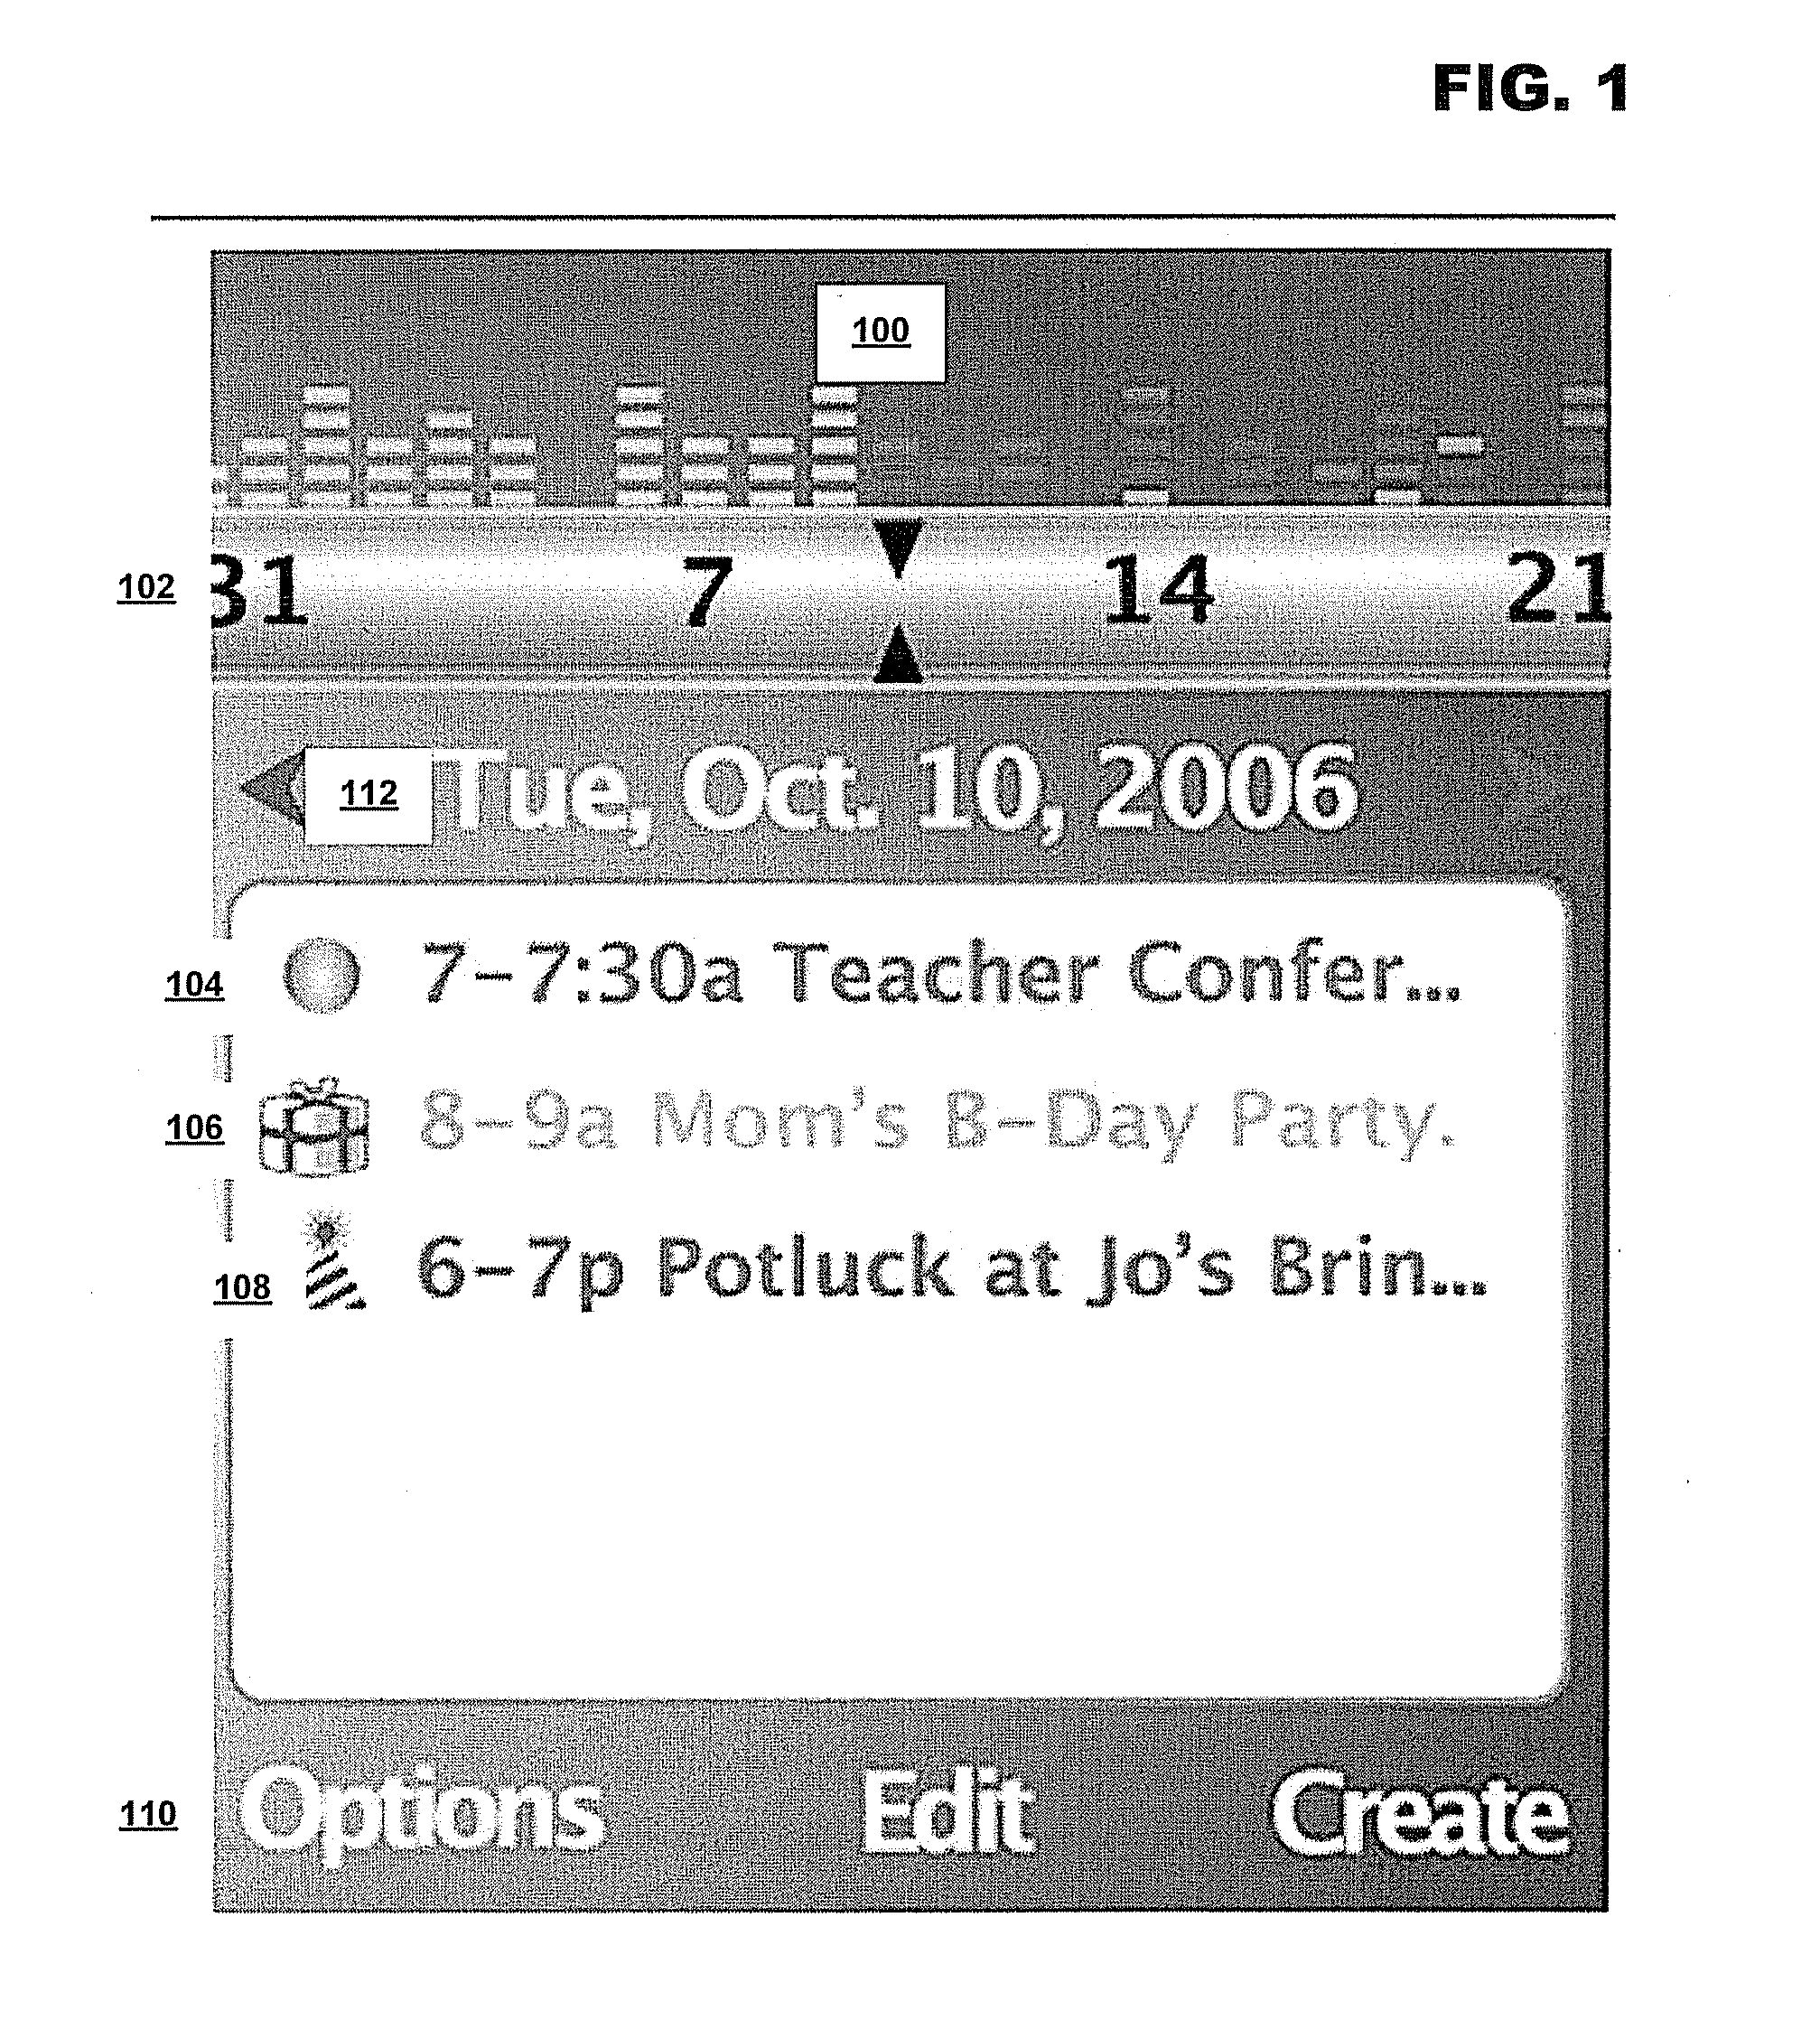 Method and system for synchronization and display of a plurality of calendars on a device